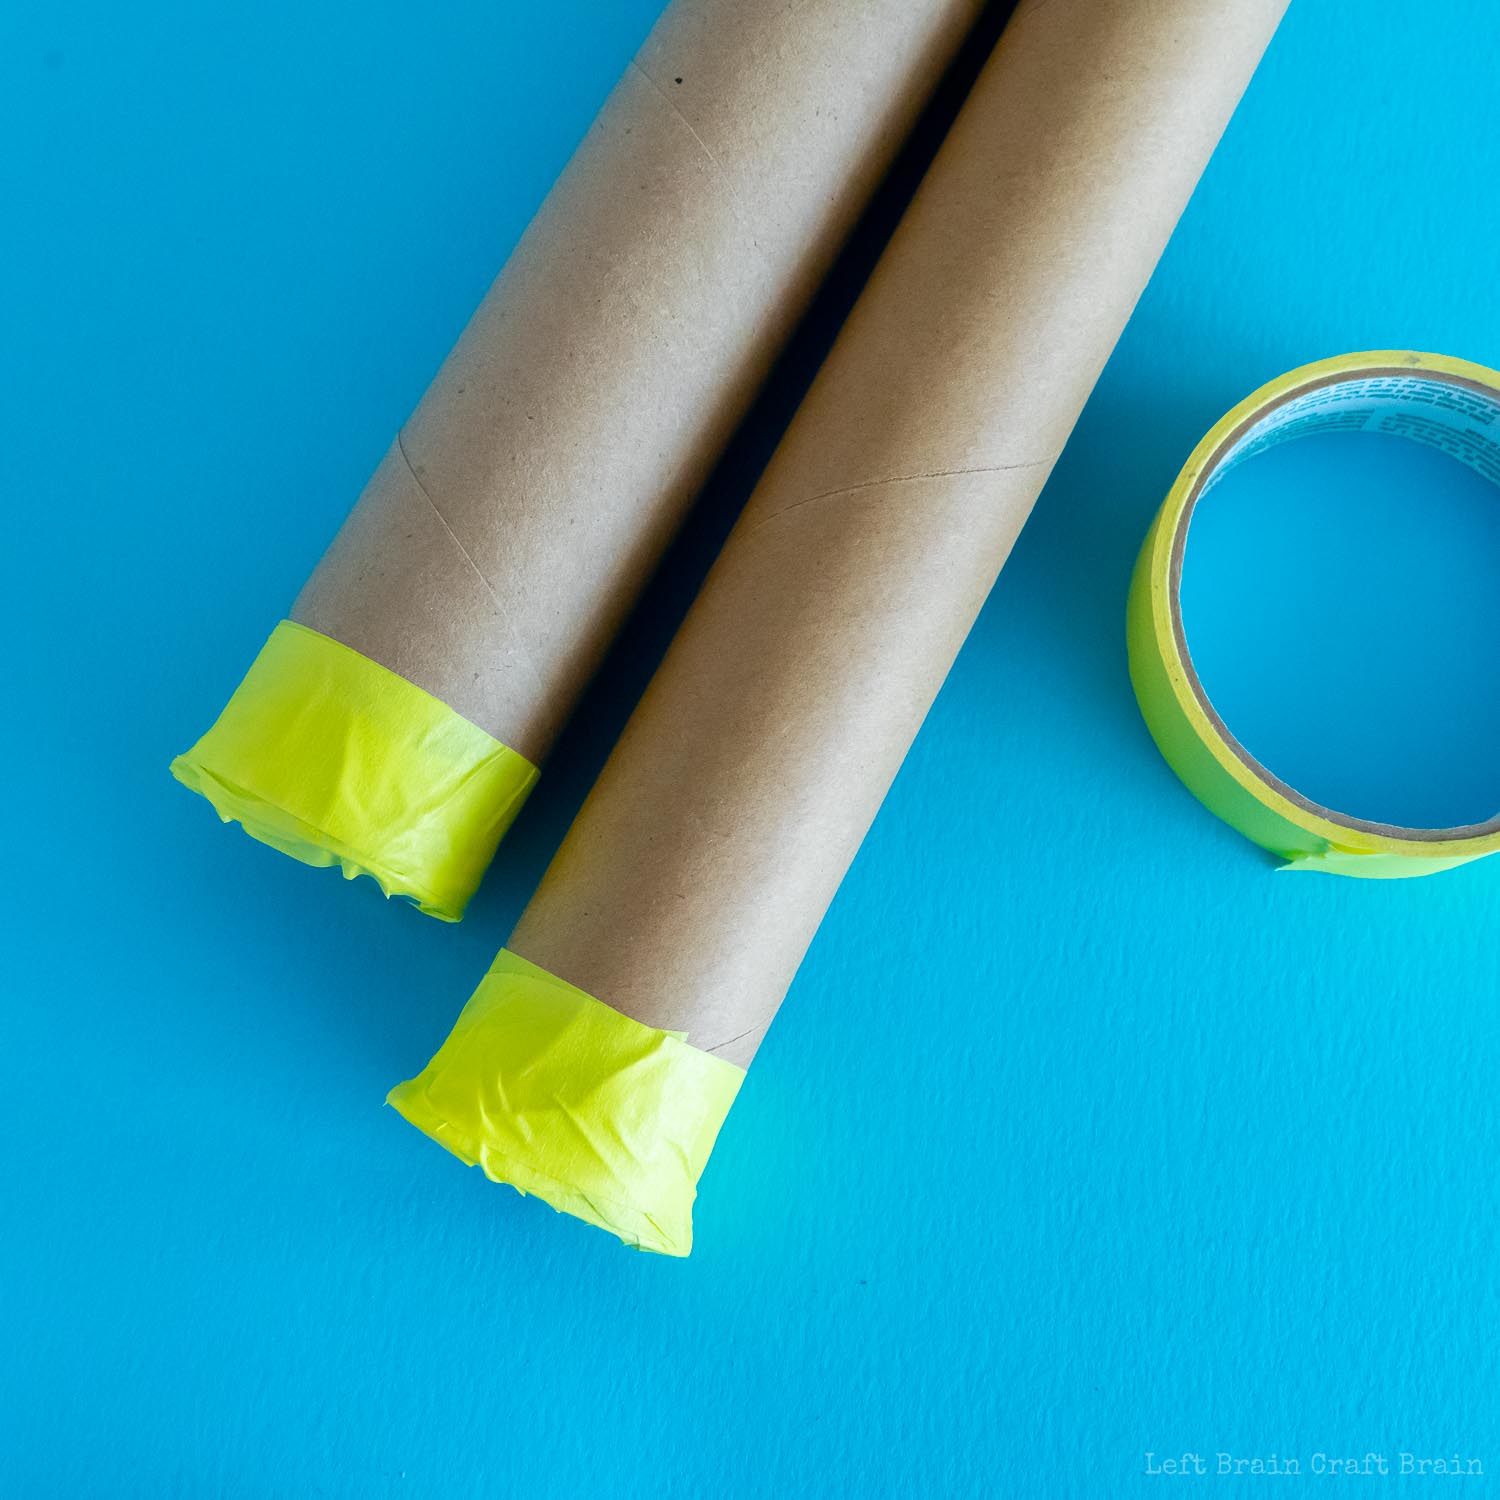 diy telescope - two paper towel rolls with ends taped with yellow tape plus yellow tape roll on blue paper